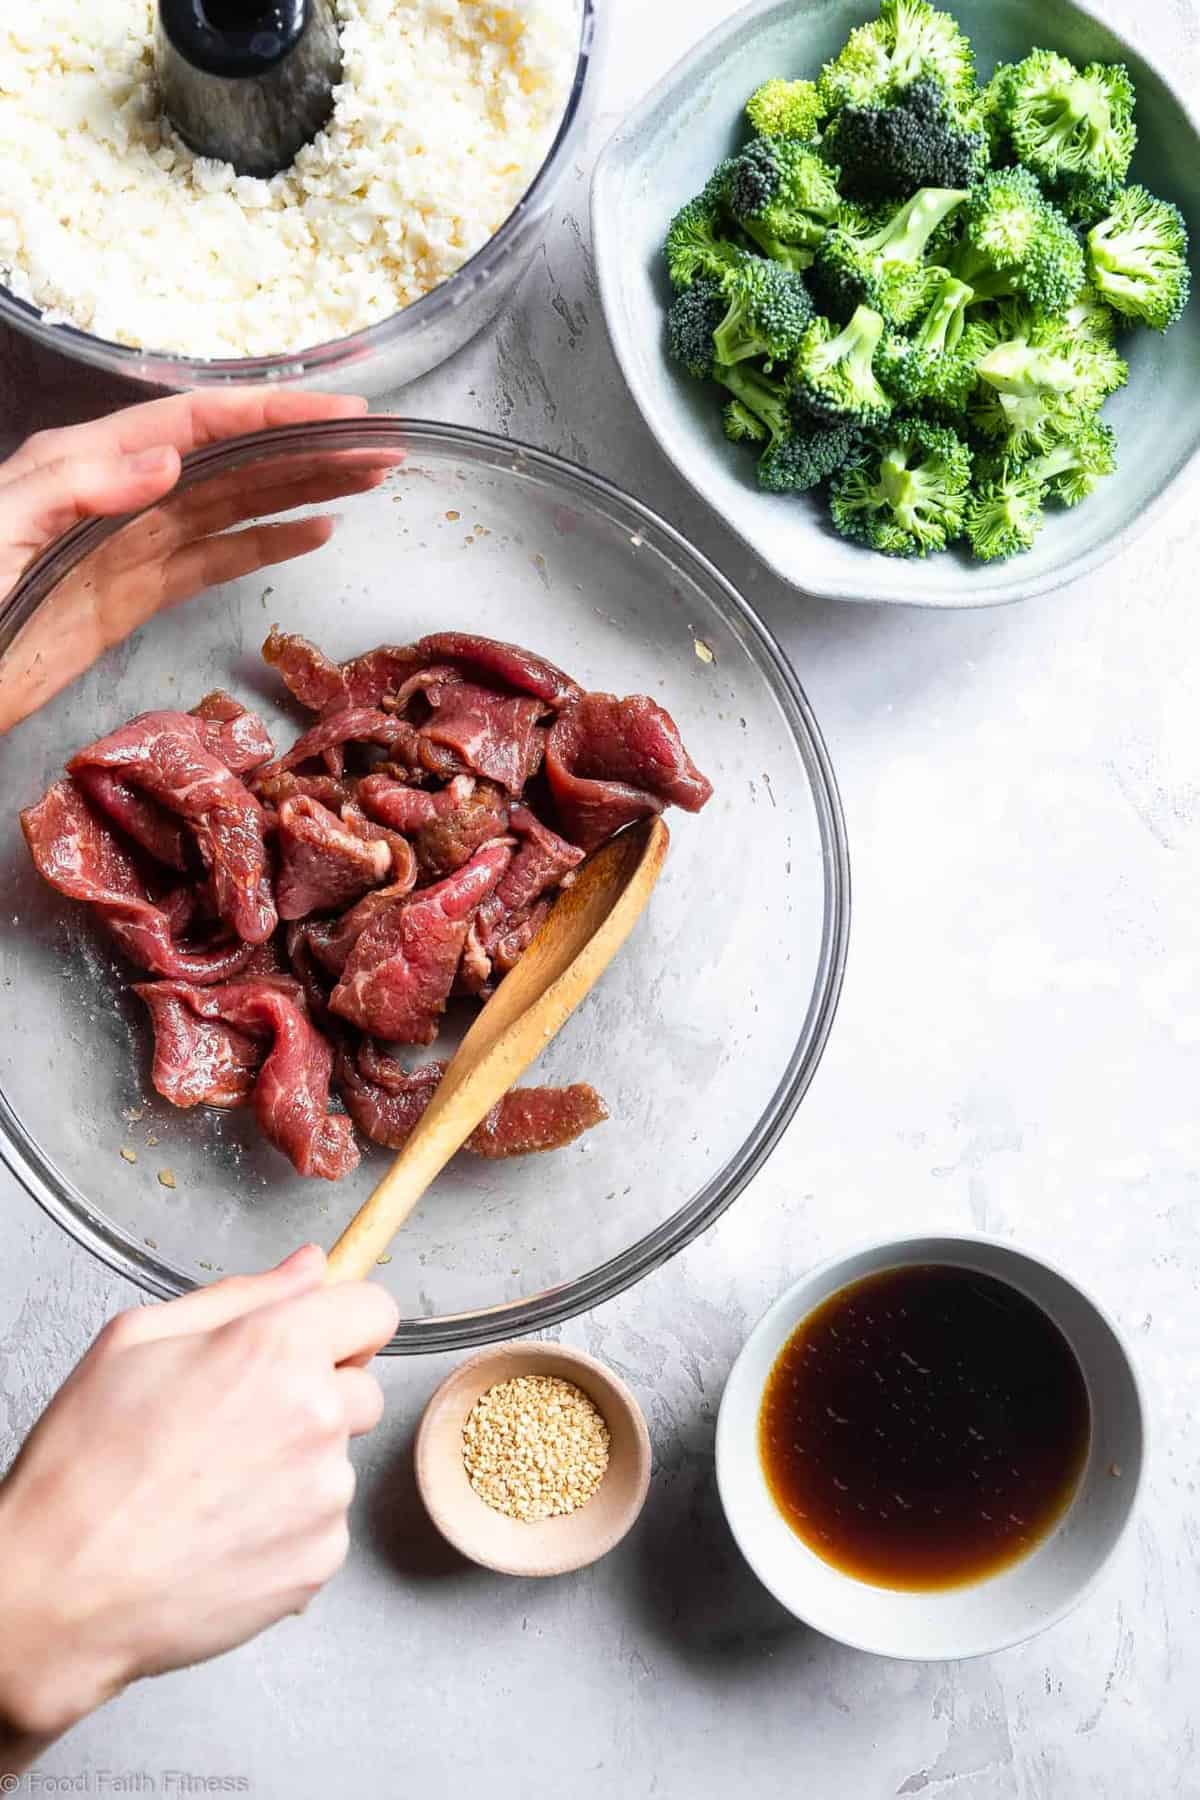 Easy Whole30 Low Carb Paleo Beef and Broccoli - This healthy beef and broccoli is an EASY, one-pot weeknight meal that even picky eaters will love! So much yummier and healthier than takeout too! | #Foodfaithfitness | 